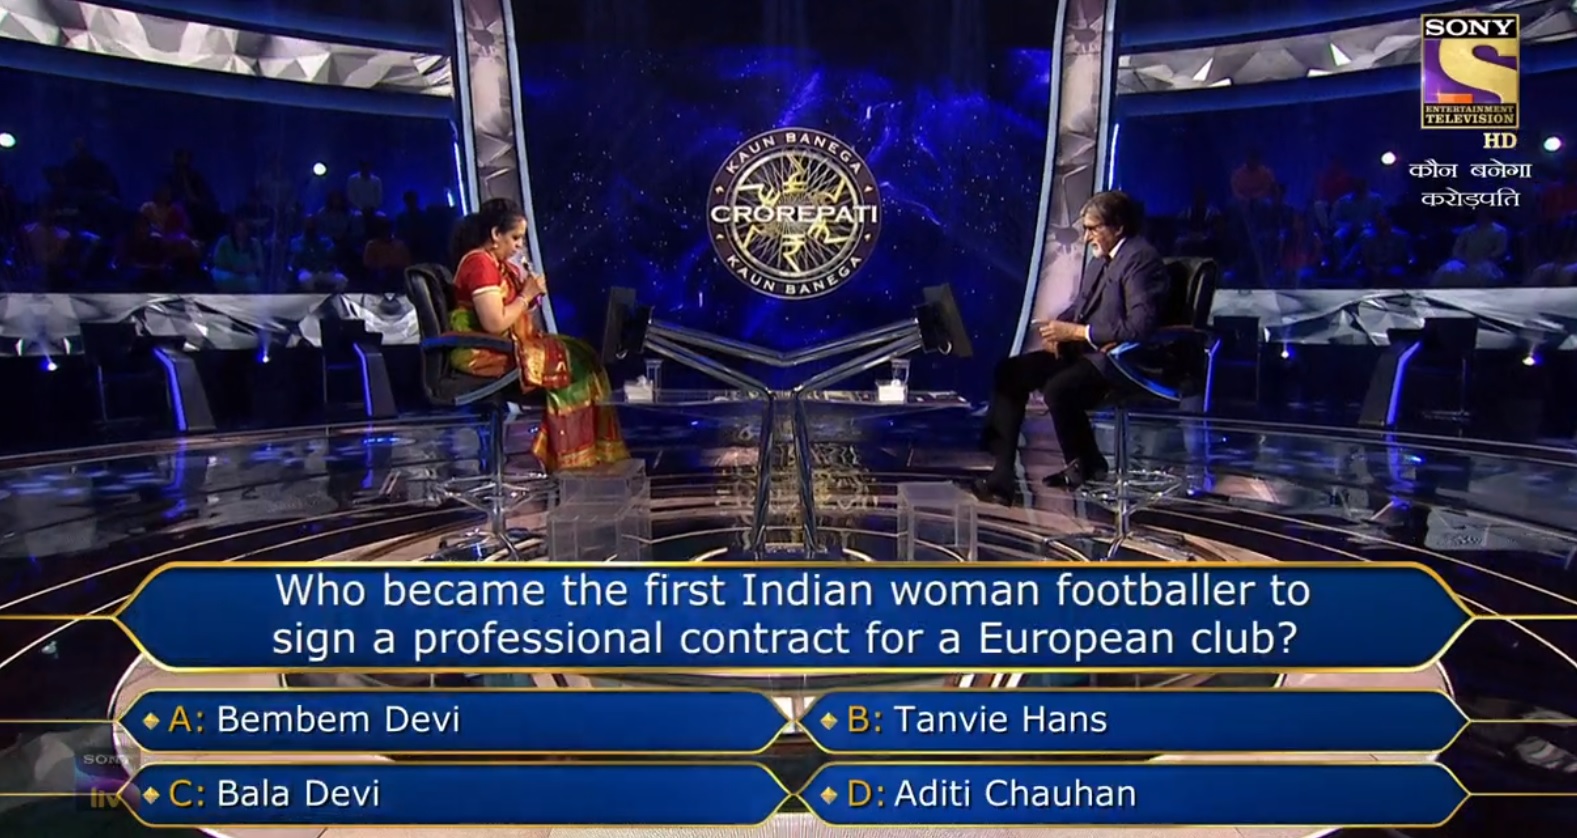 Ques : Who became the first Indian woman footballer to sign a professional contract for a European club?